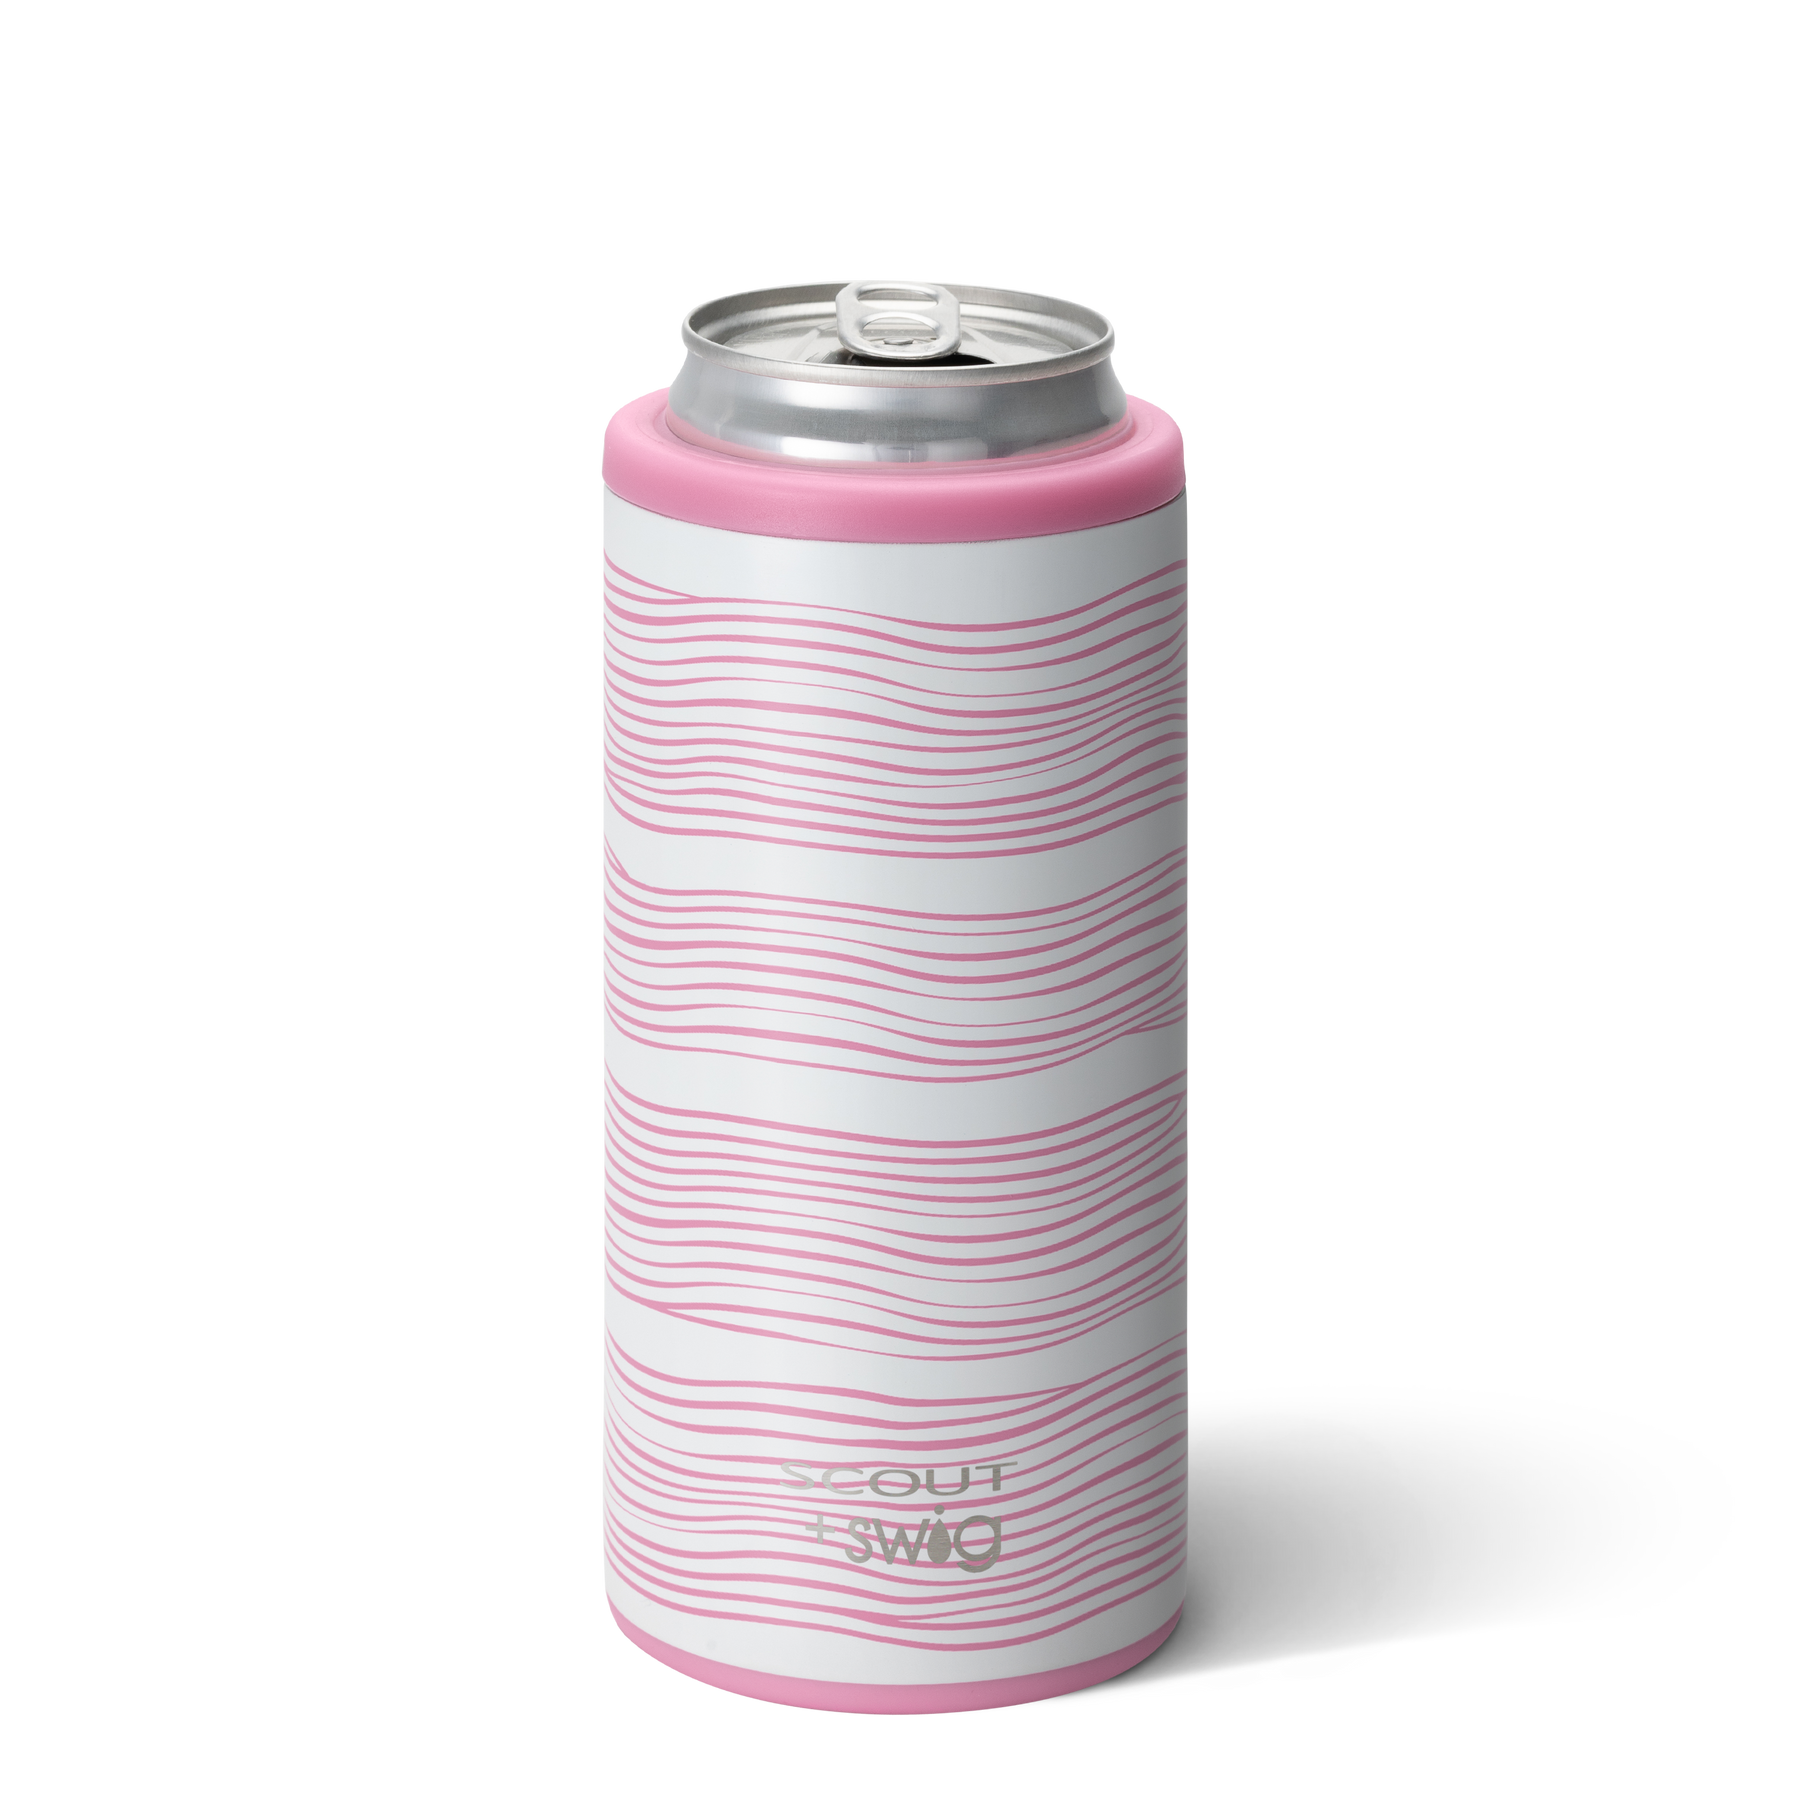 Swig Skinny Can Cooler- Oh Happy Day